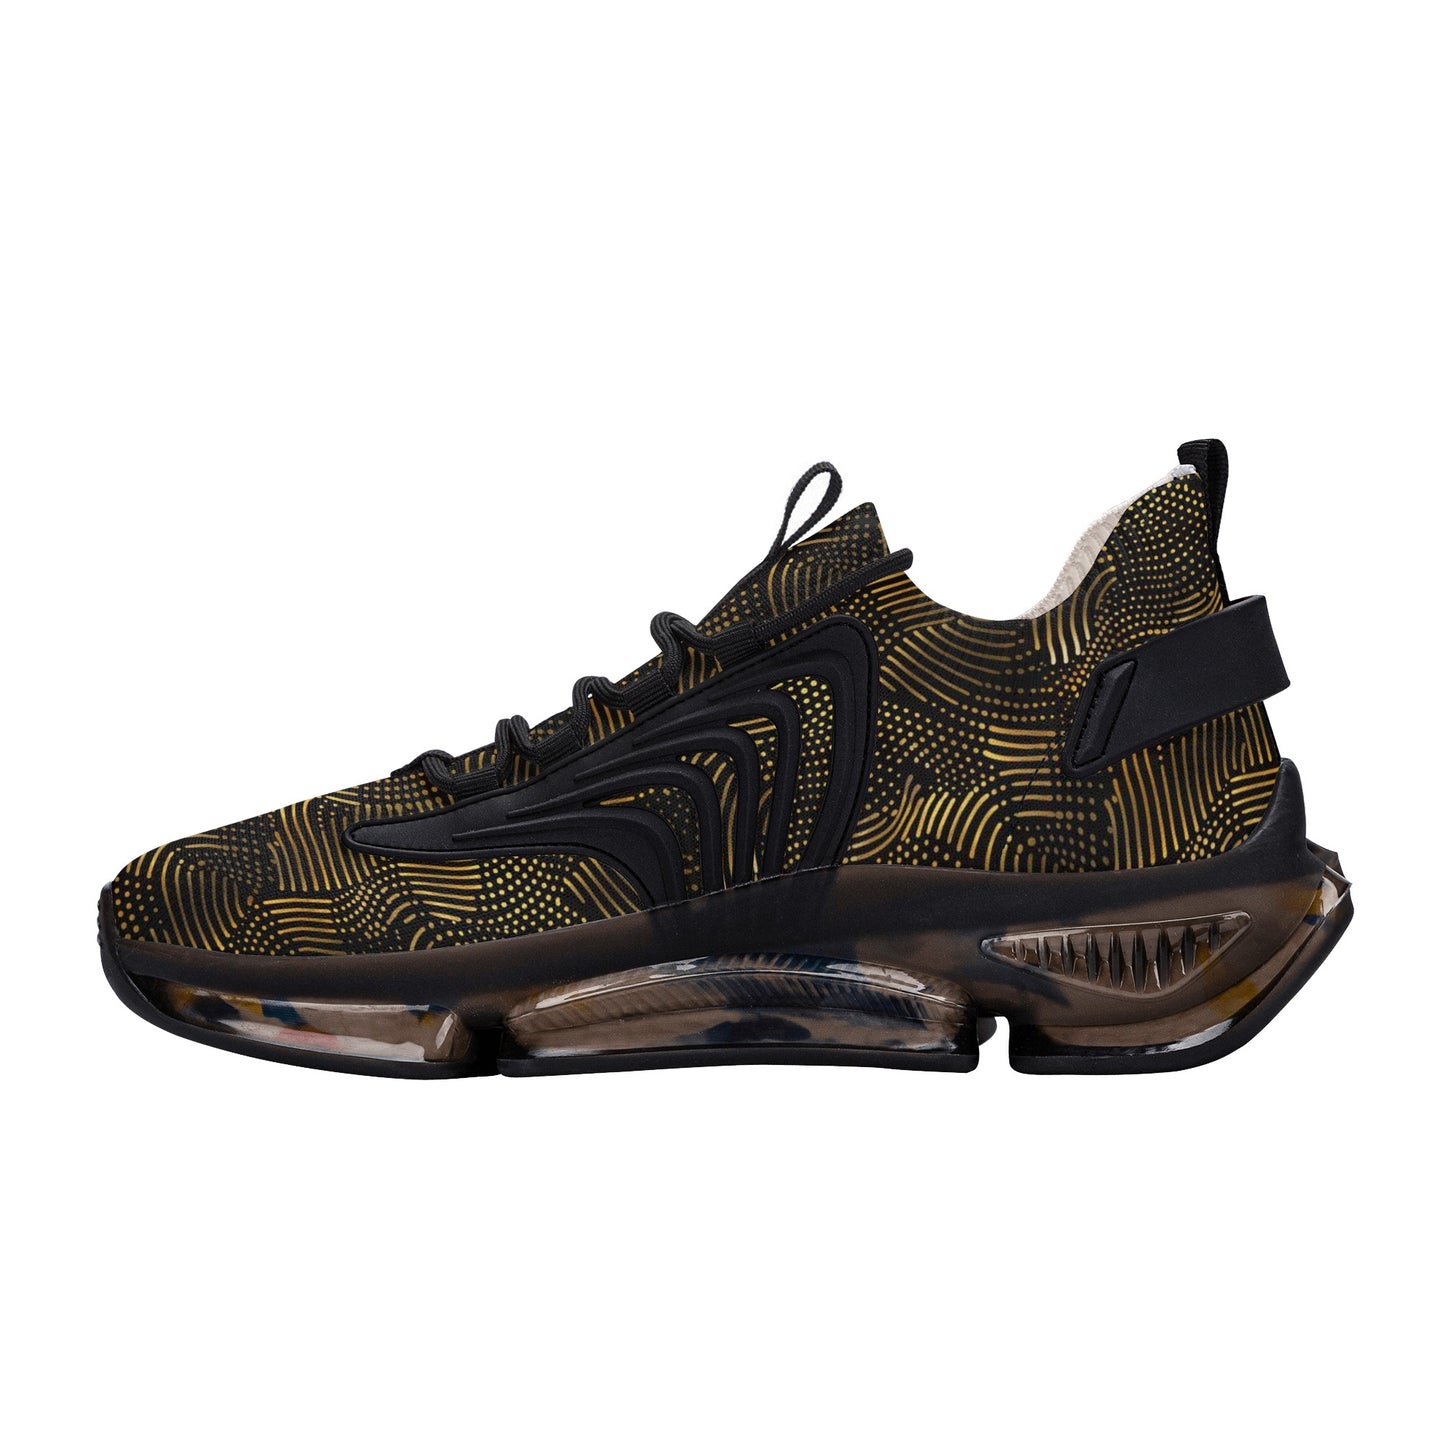 Gold and Black Men Air Cushion Sneakers, Breathable Mesh Running Sport Printed Lace Up Trainers Designer Casual Gym Shoes Footwear